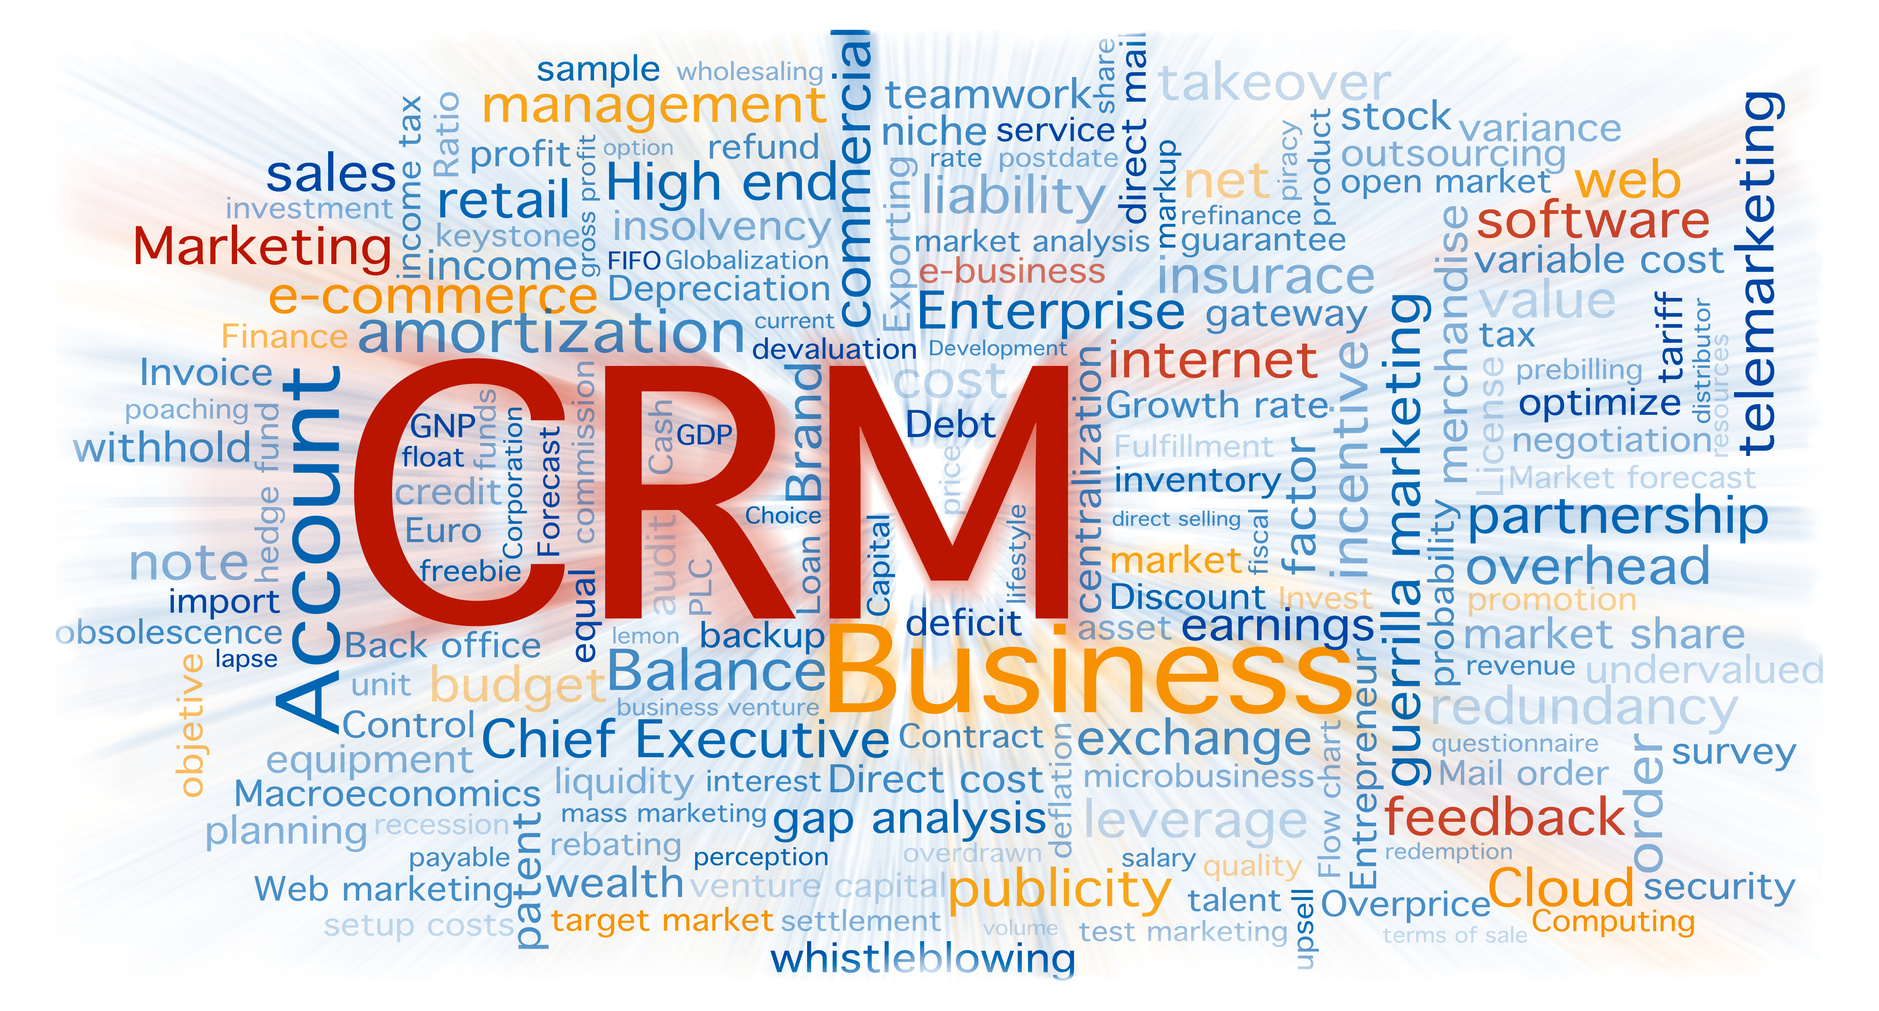 crm software services, best crm software services, crm software for service company, crm software services India, CRM software for services, CRM software services company, CRM system, customer relationship management software system, CRM software for small business, best CRM software, CRM India, CRM software India, CRM software company, customer relationship management services, crm erp softwares, popular crm software services, crm software service provider, crm software professional services, crm software for professional services